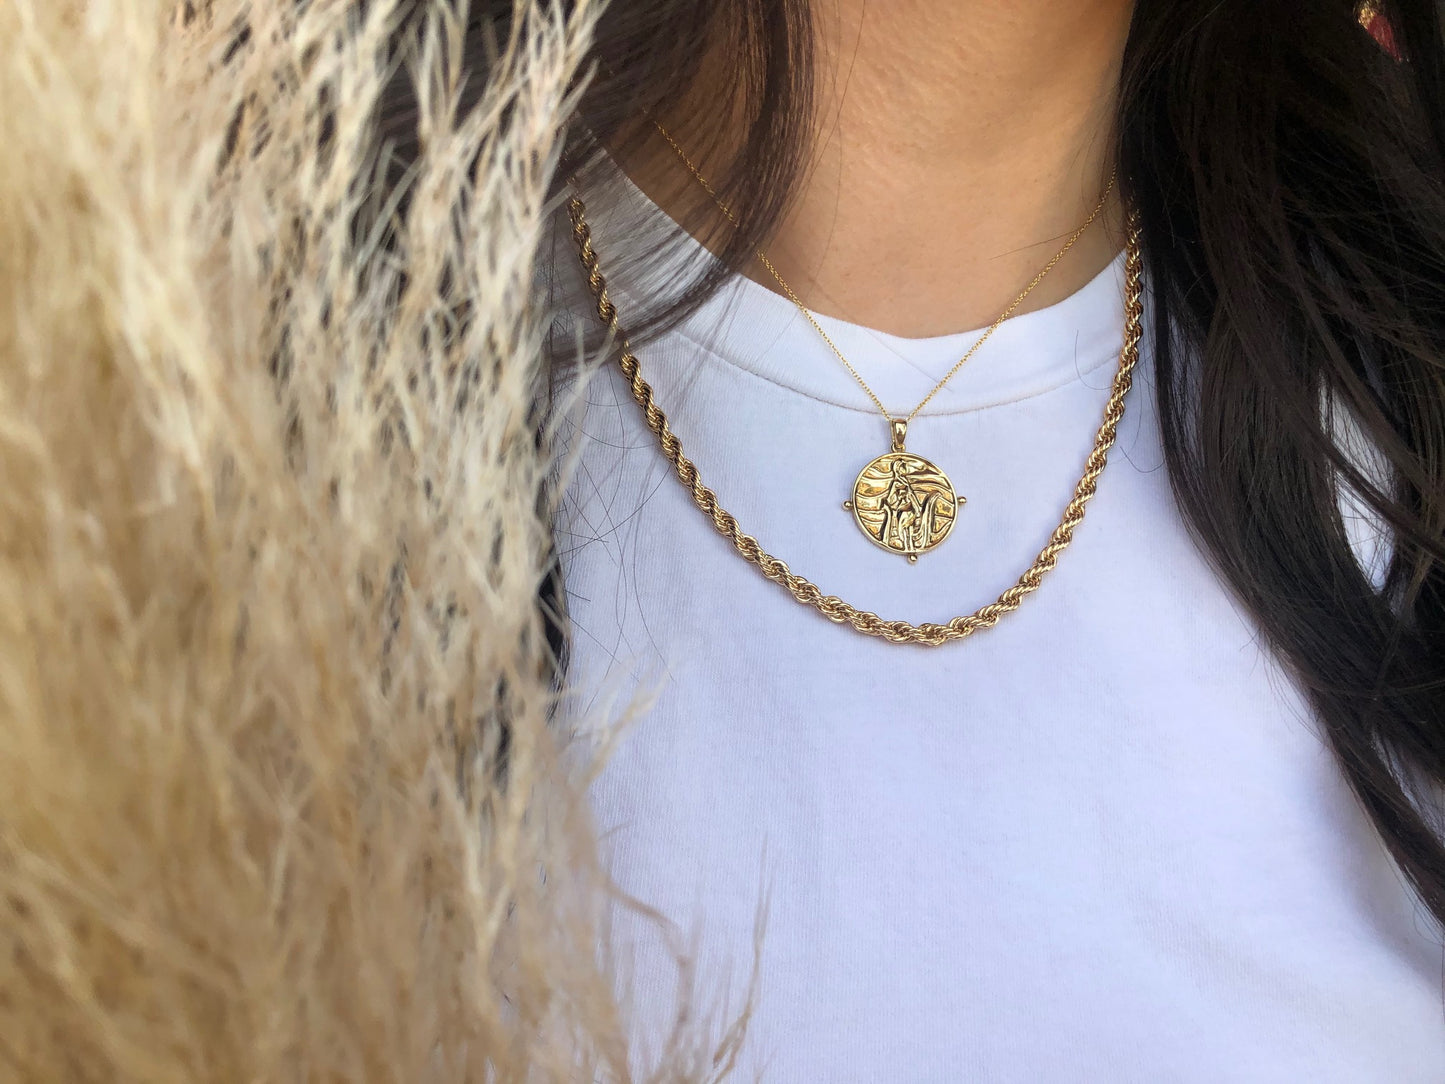 The Sevan Necklace